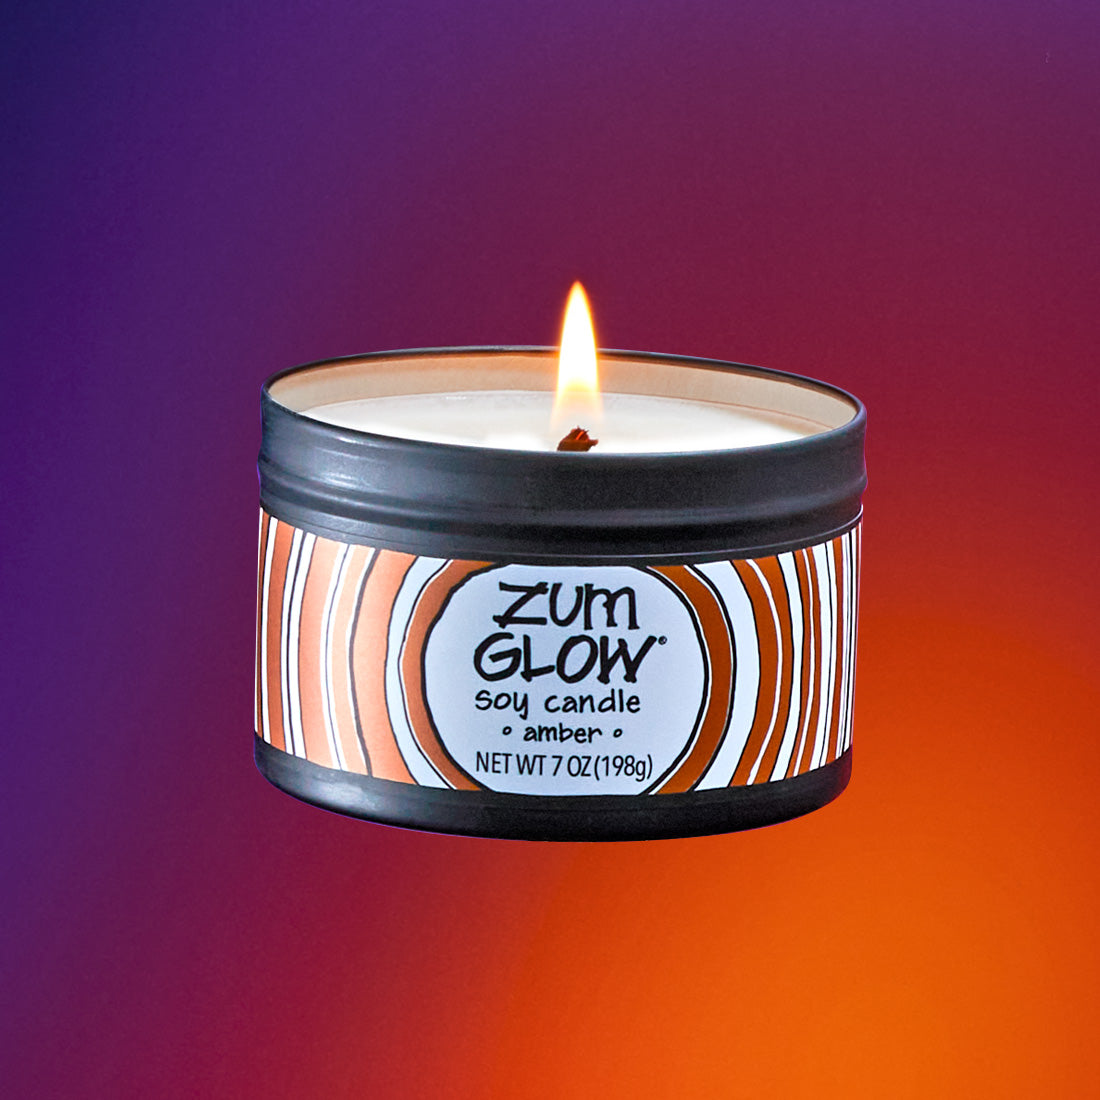 Room Spray Archives - Glow Scented Candles